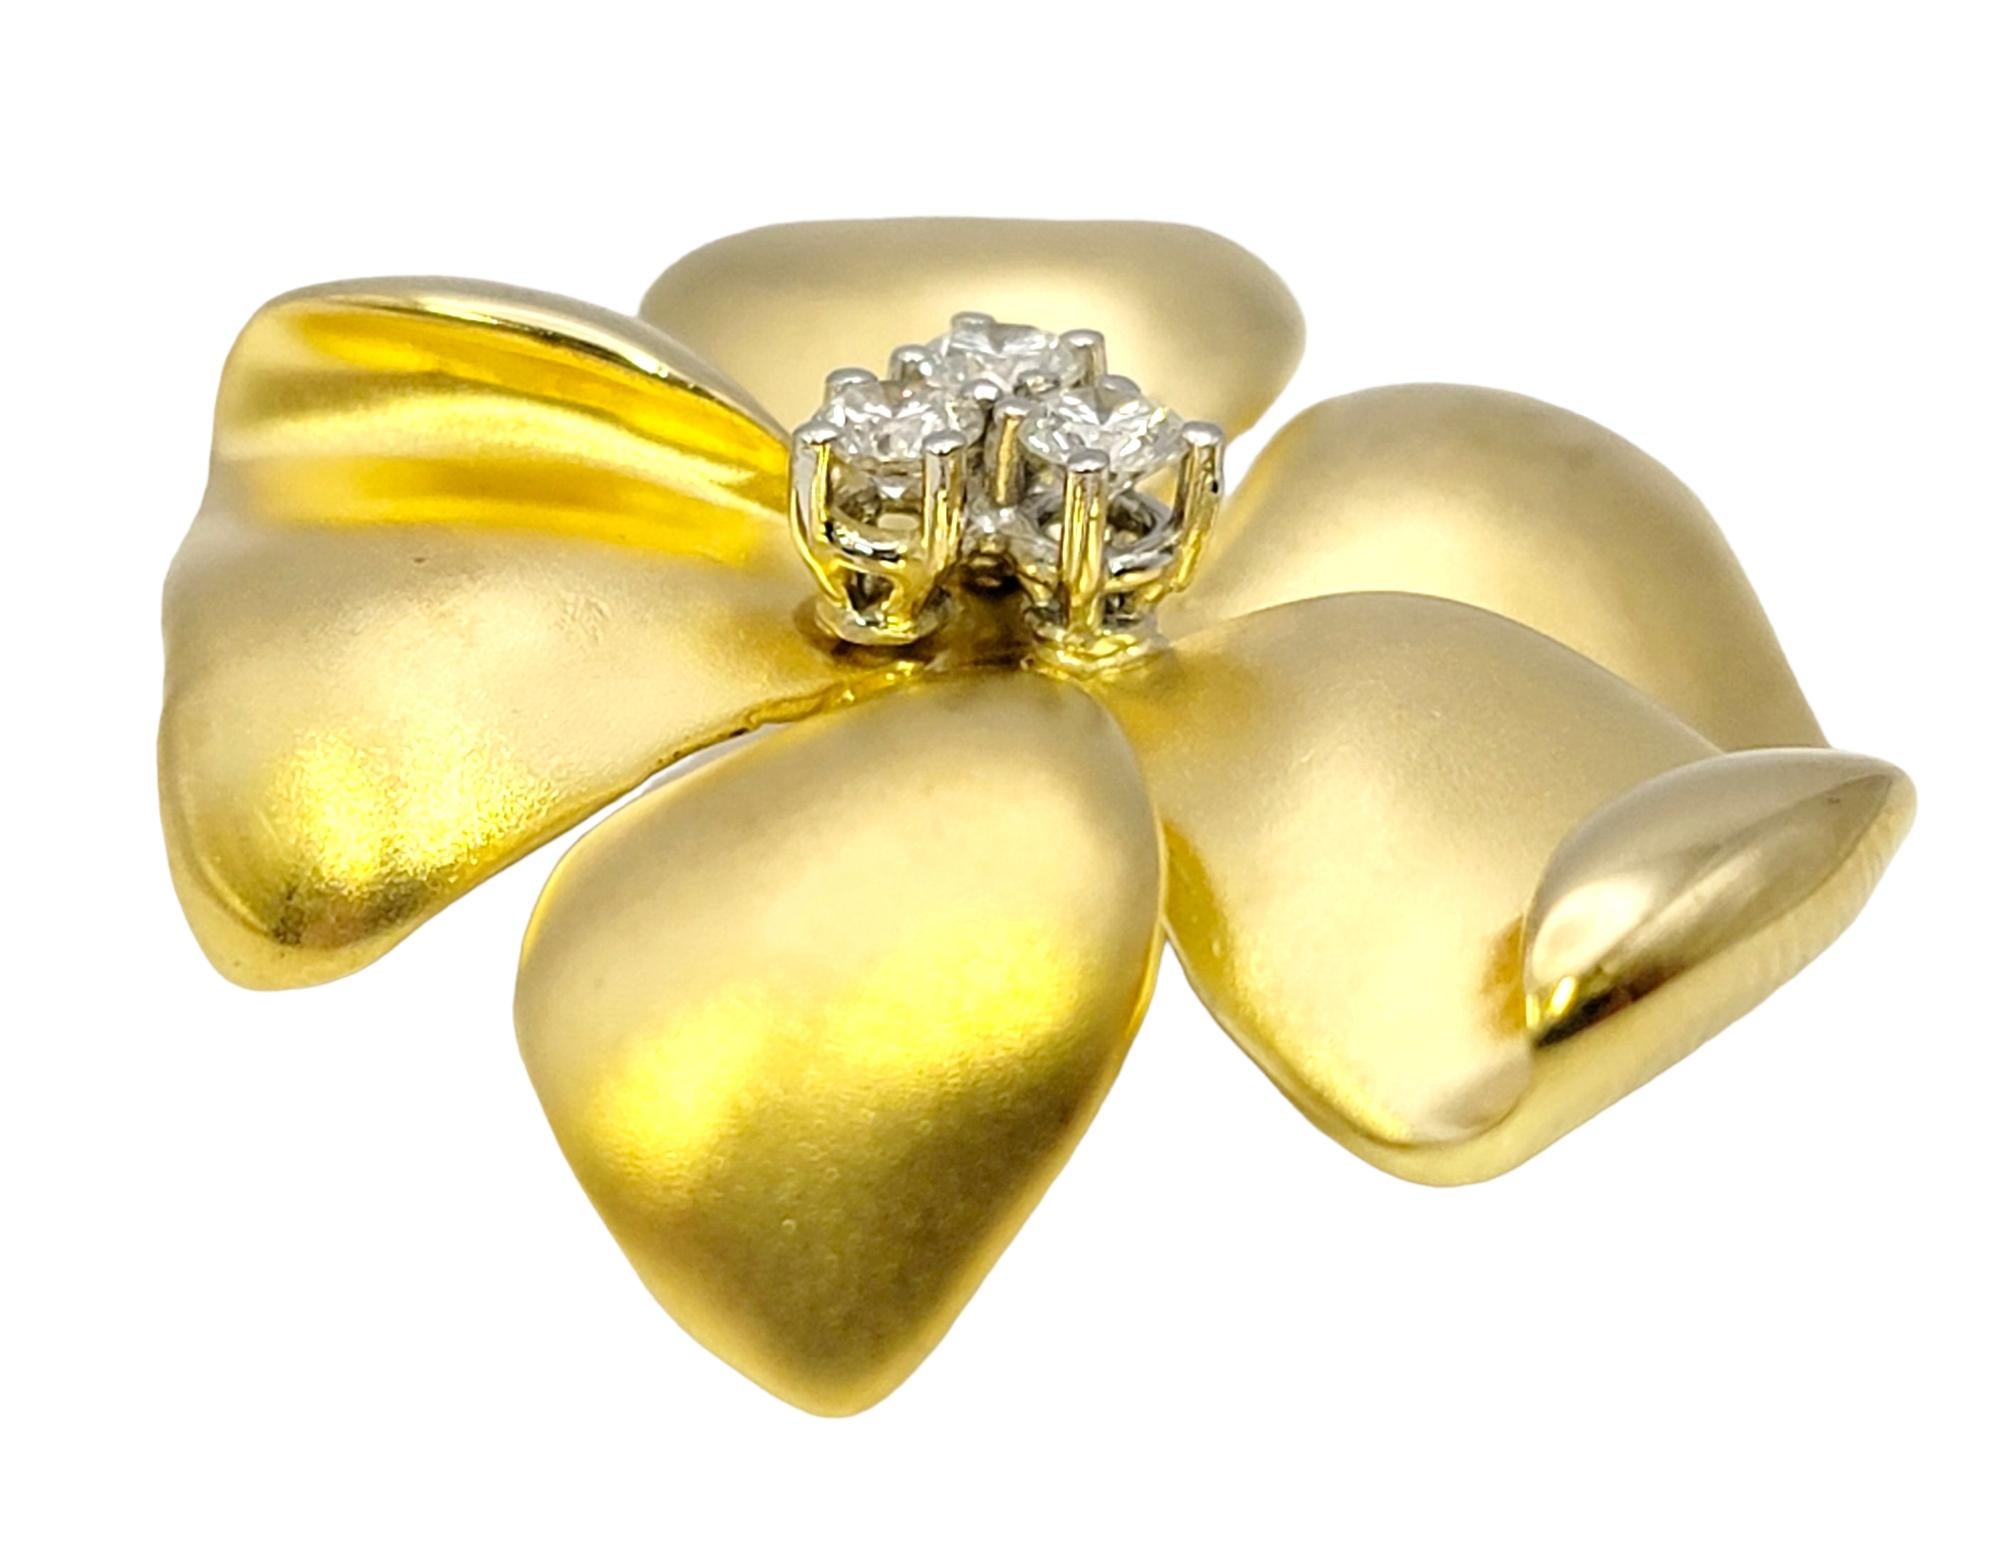 Brushed 18 Karat Yellow Gold Flower Pin / Brooch with Round Diamond Accents For Sale 2